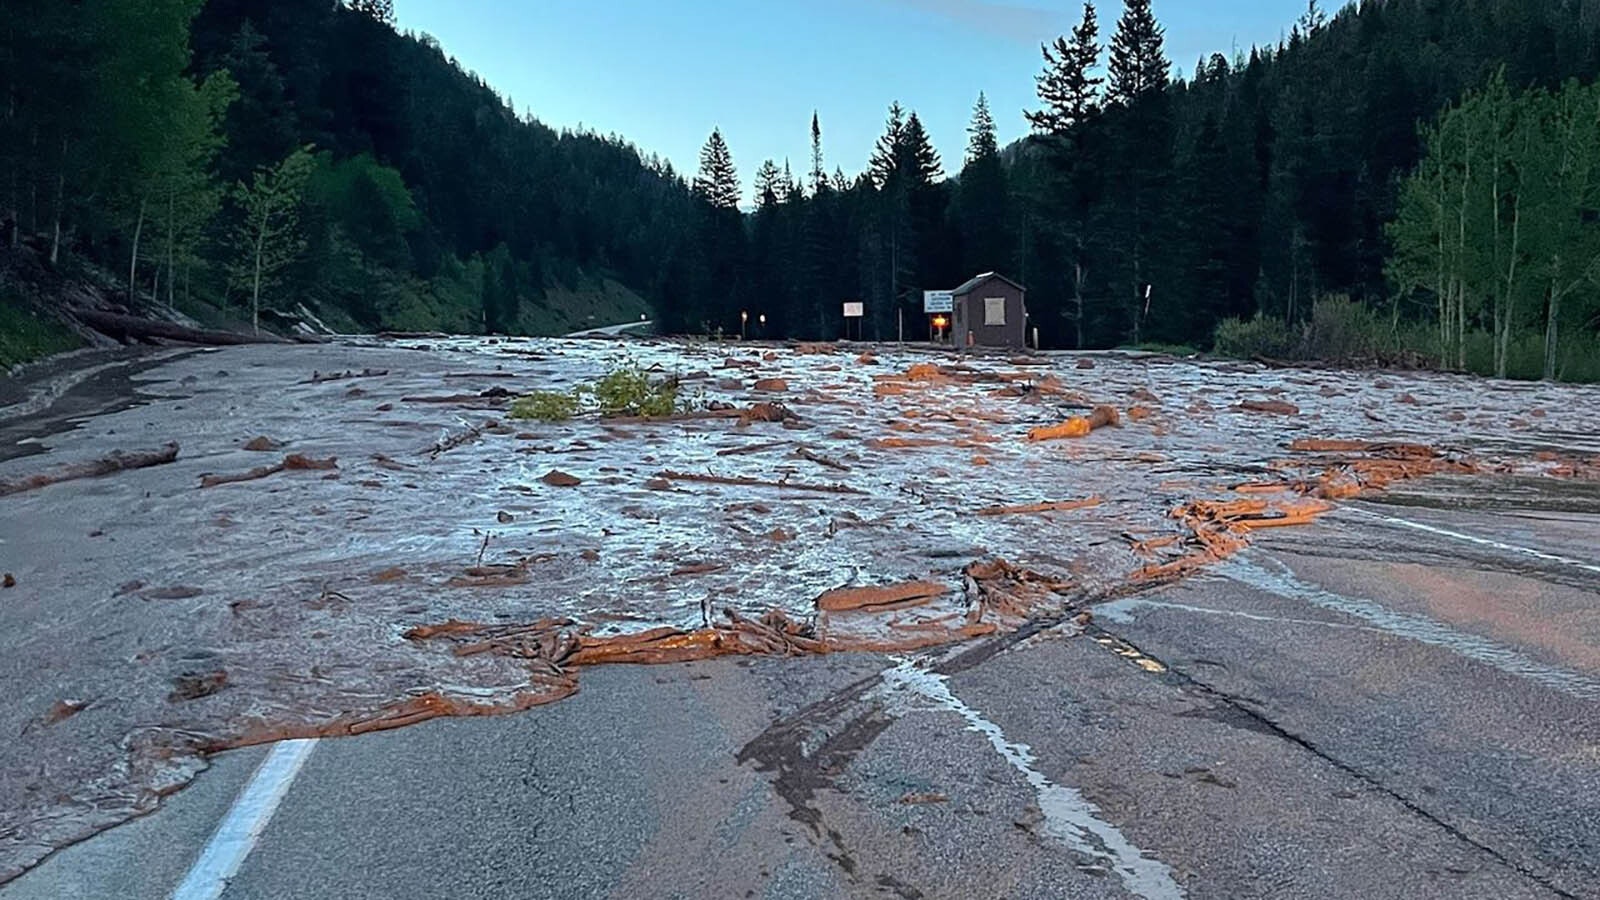 A mudslide at about 4:20 a.m. Thursday morning has shut down Wyoming Highway 22 over Teton Pass at milepost 15. The closure comes less than 24 after a large two-lane crack in the pavement of the highway closed the pass for a few hours.